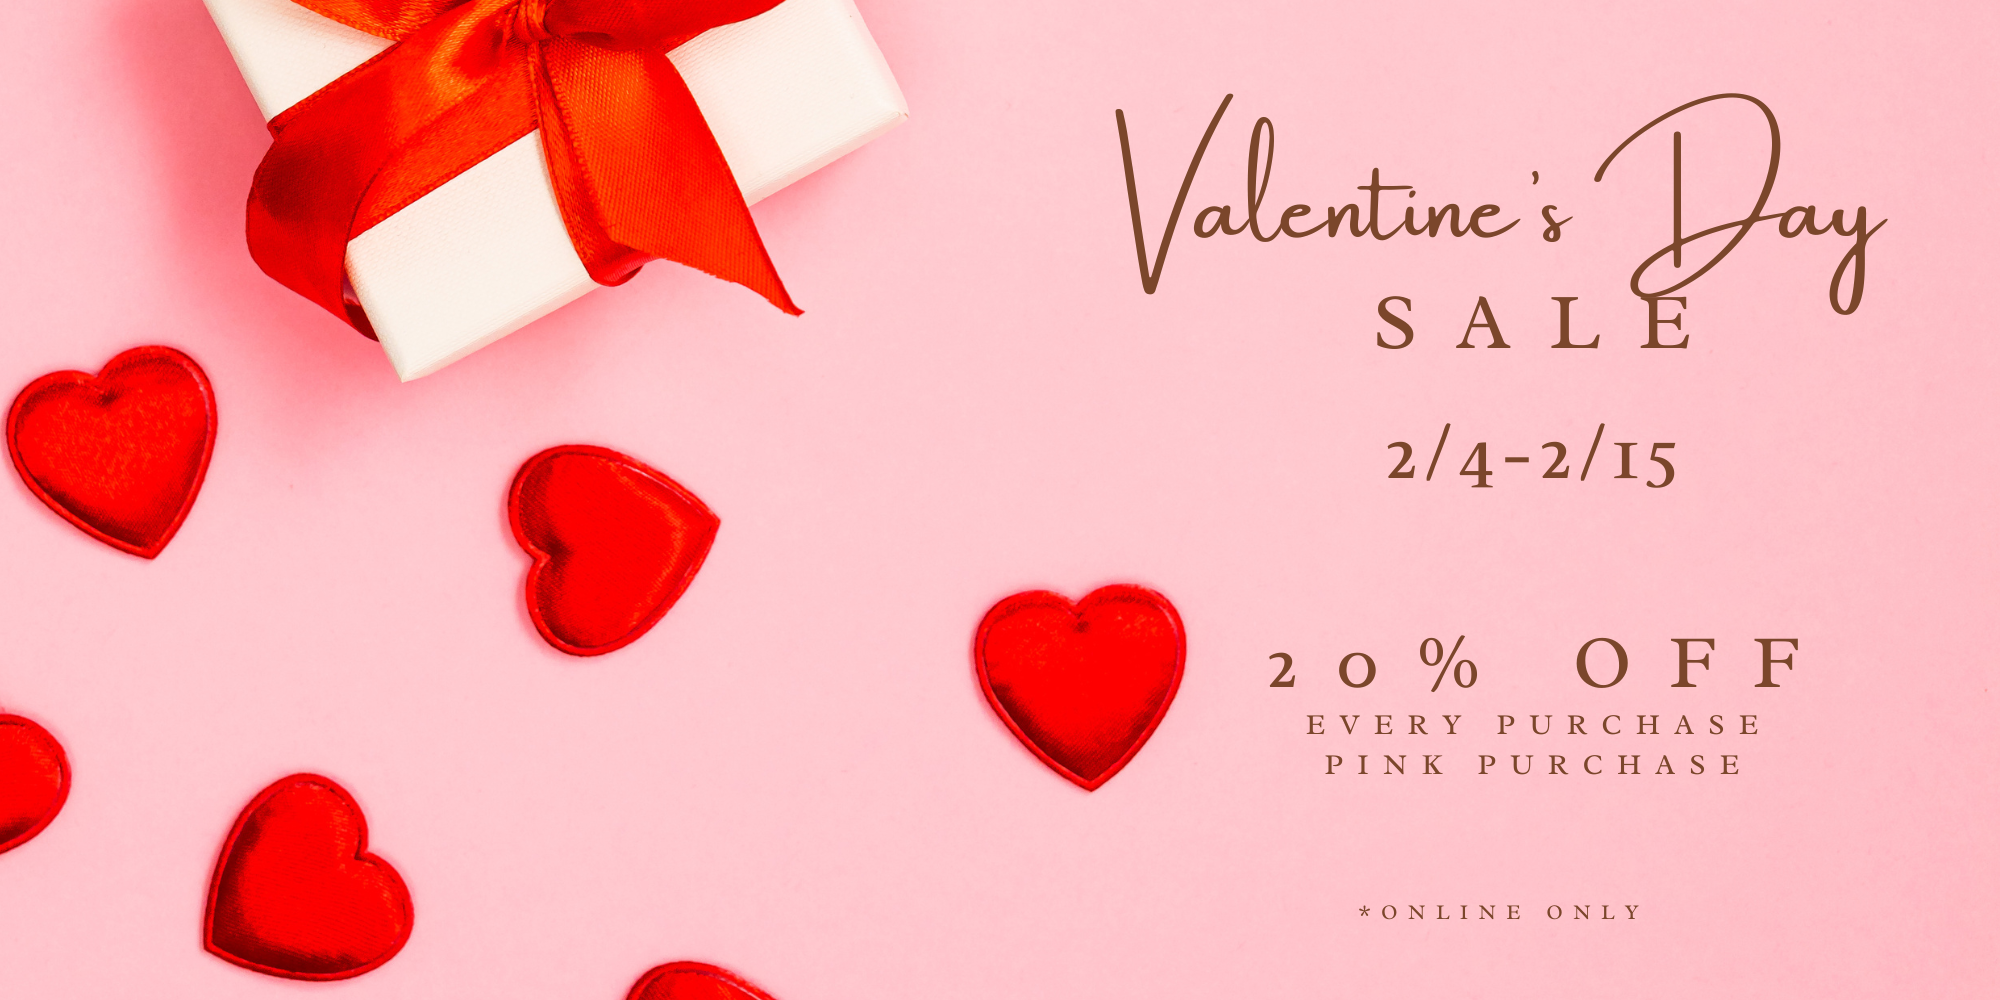 💗IT'S OFFICIALLY A "PINK" SALE💗